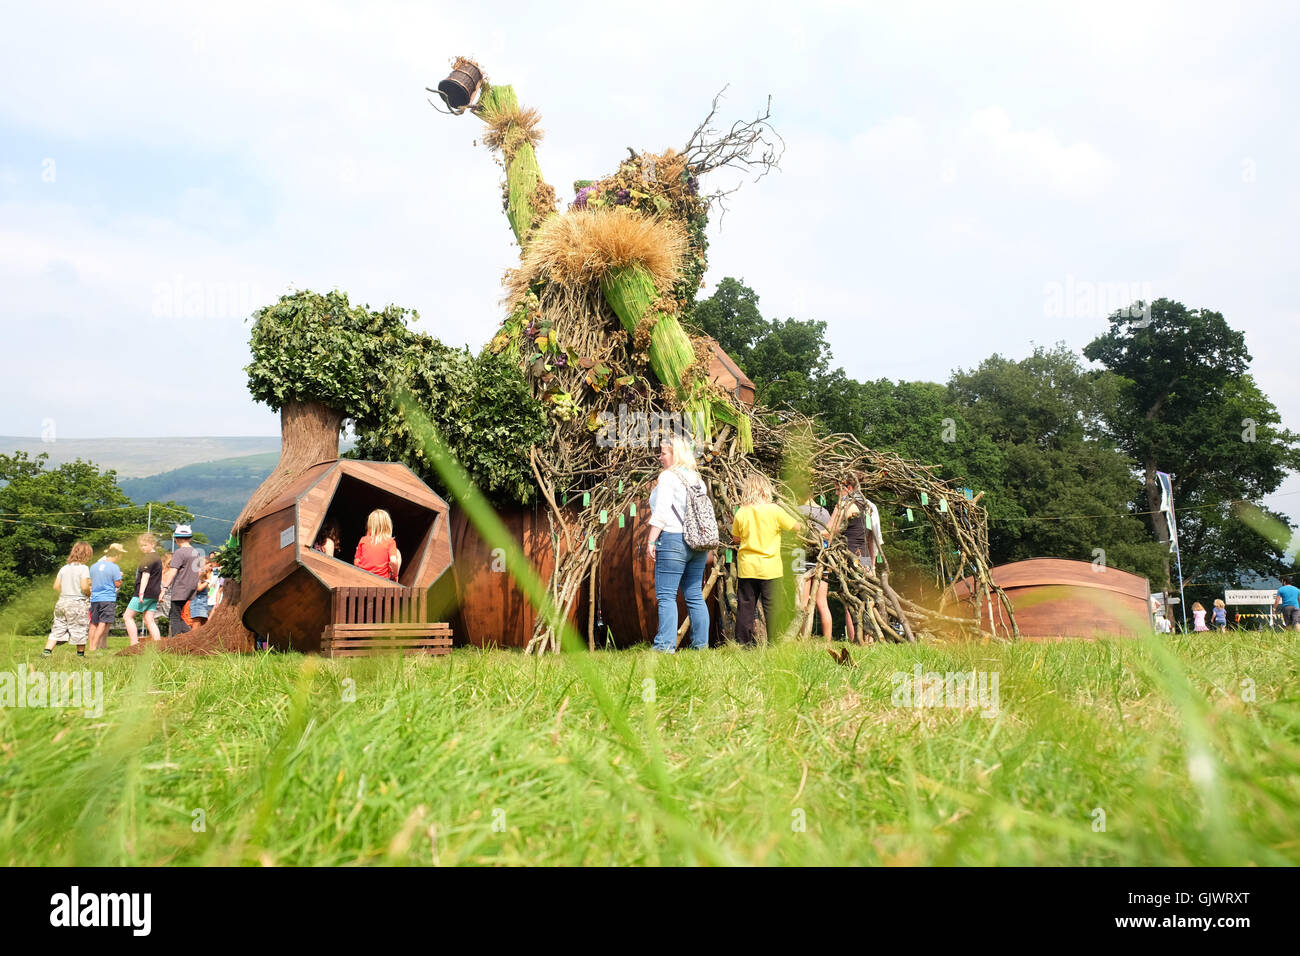 Green Man Festival, Wales, UK - August 2016. The Green Man of the Green Man Festival a sculpture made of wood and branches is the centre point of the Festival. The four day music and arts festival set beside the Brecon Beacons. Stock Photo